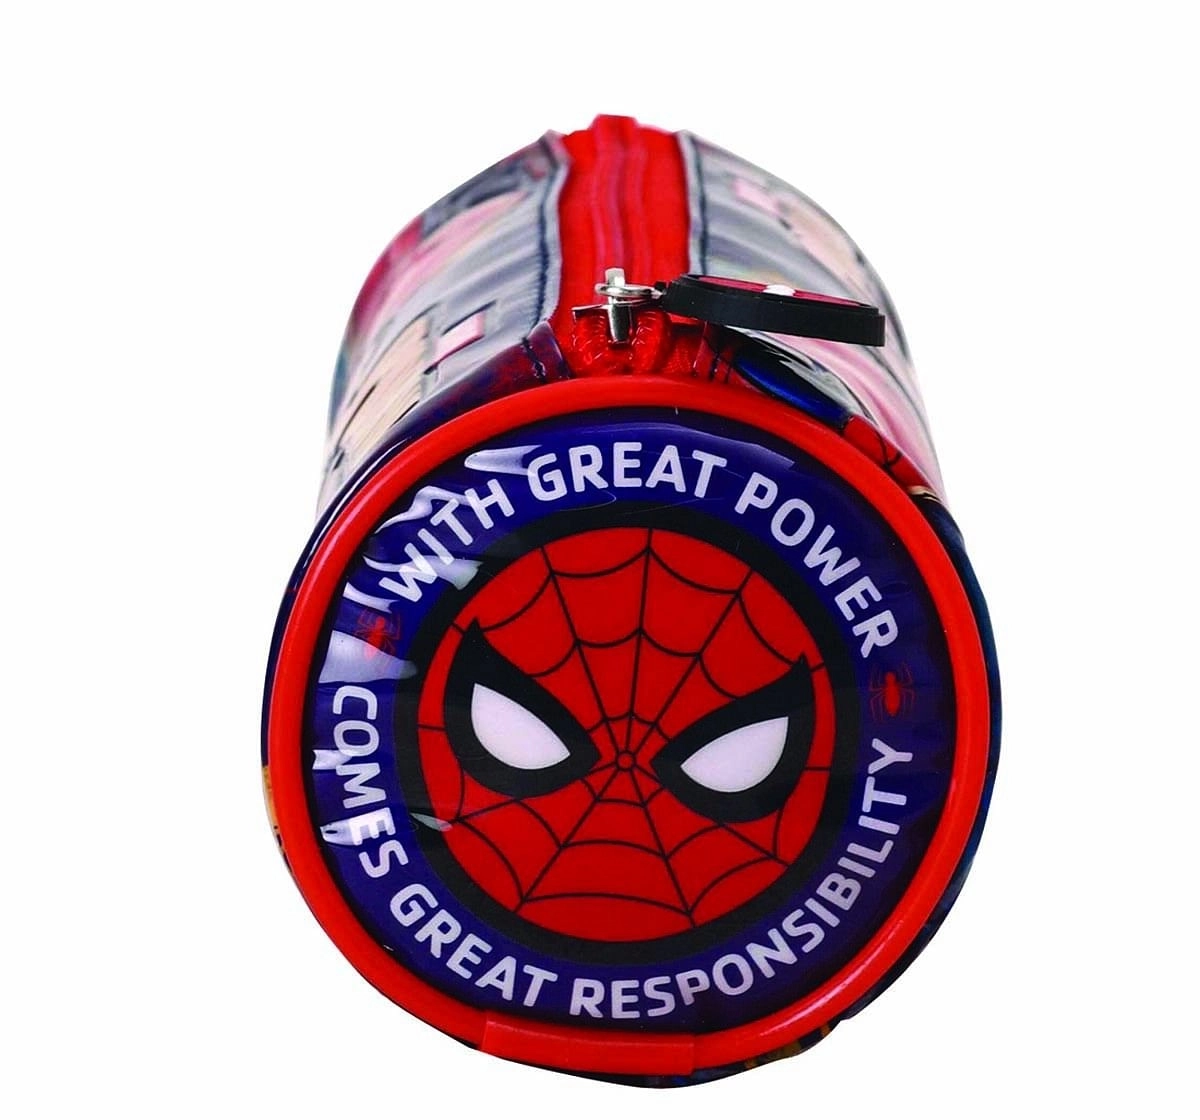 Marvel Spiderman Blue Round Zip Pouch for Age 3Y+  (Blue)